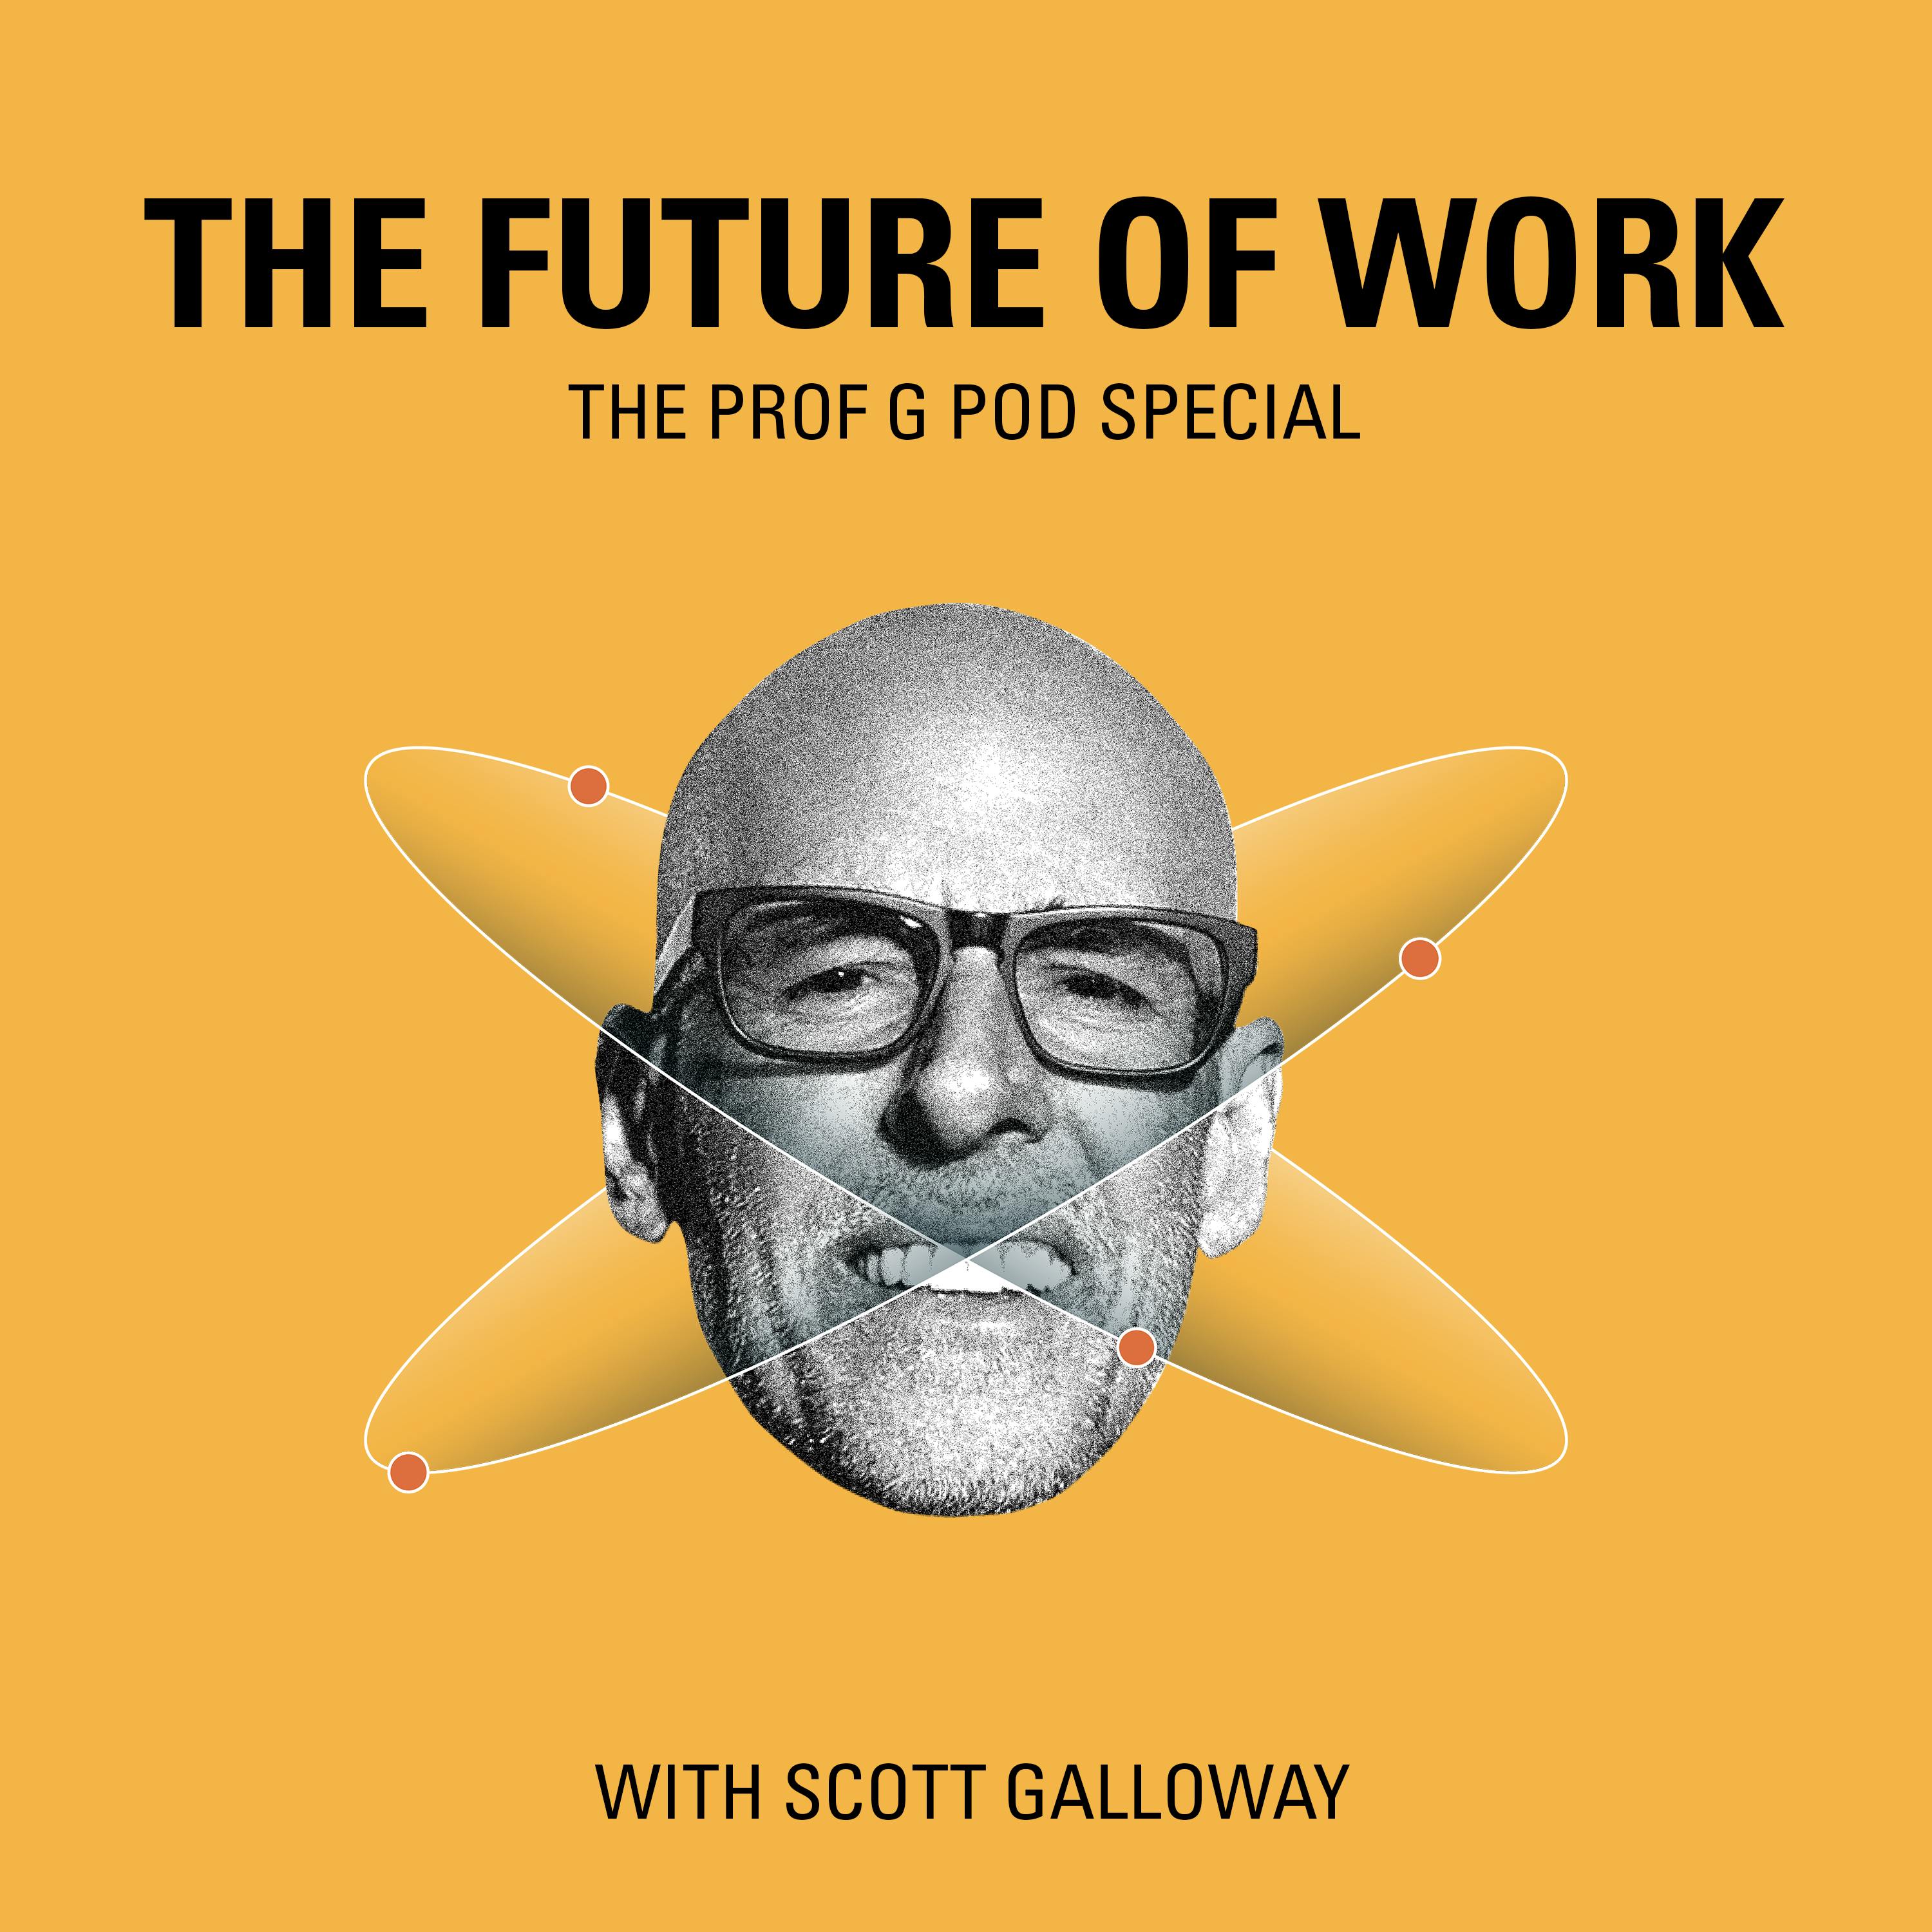 The Future of Work Part 2: Talk About Money